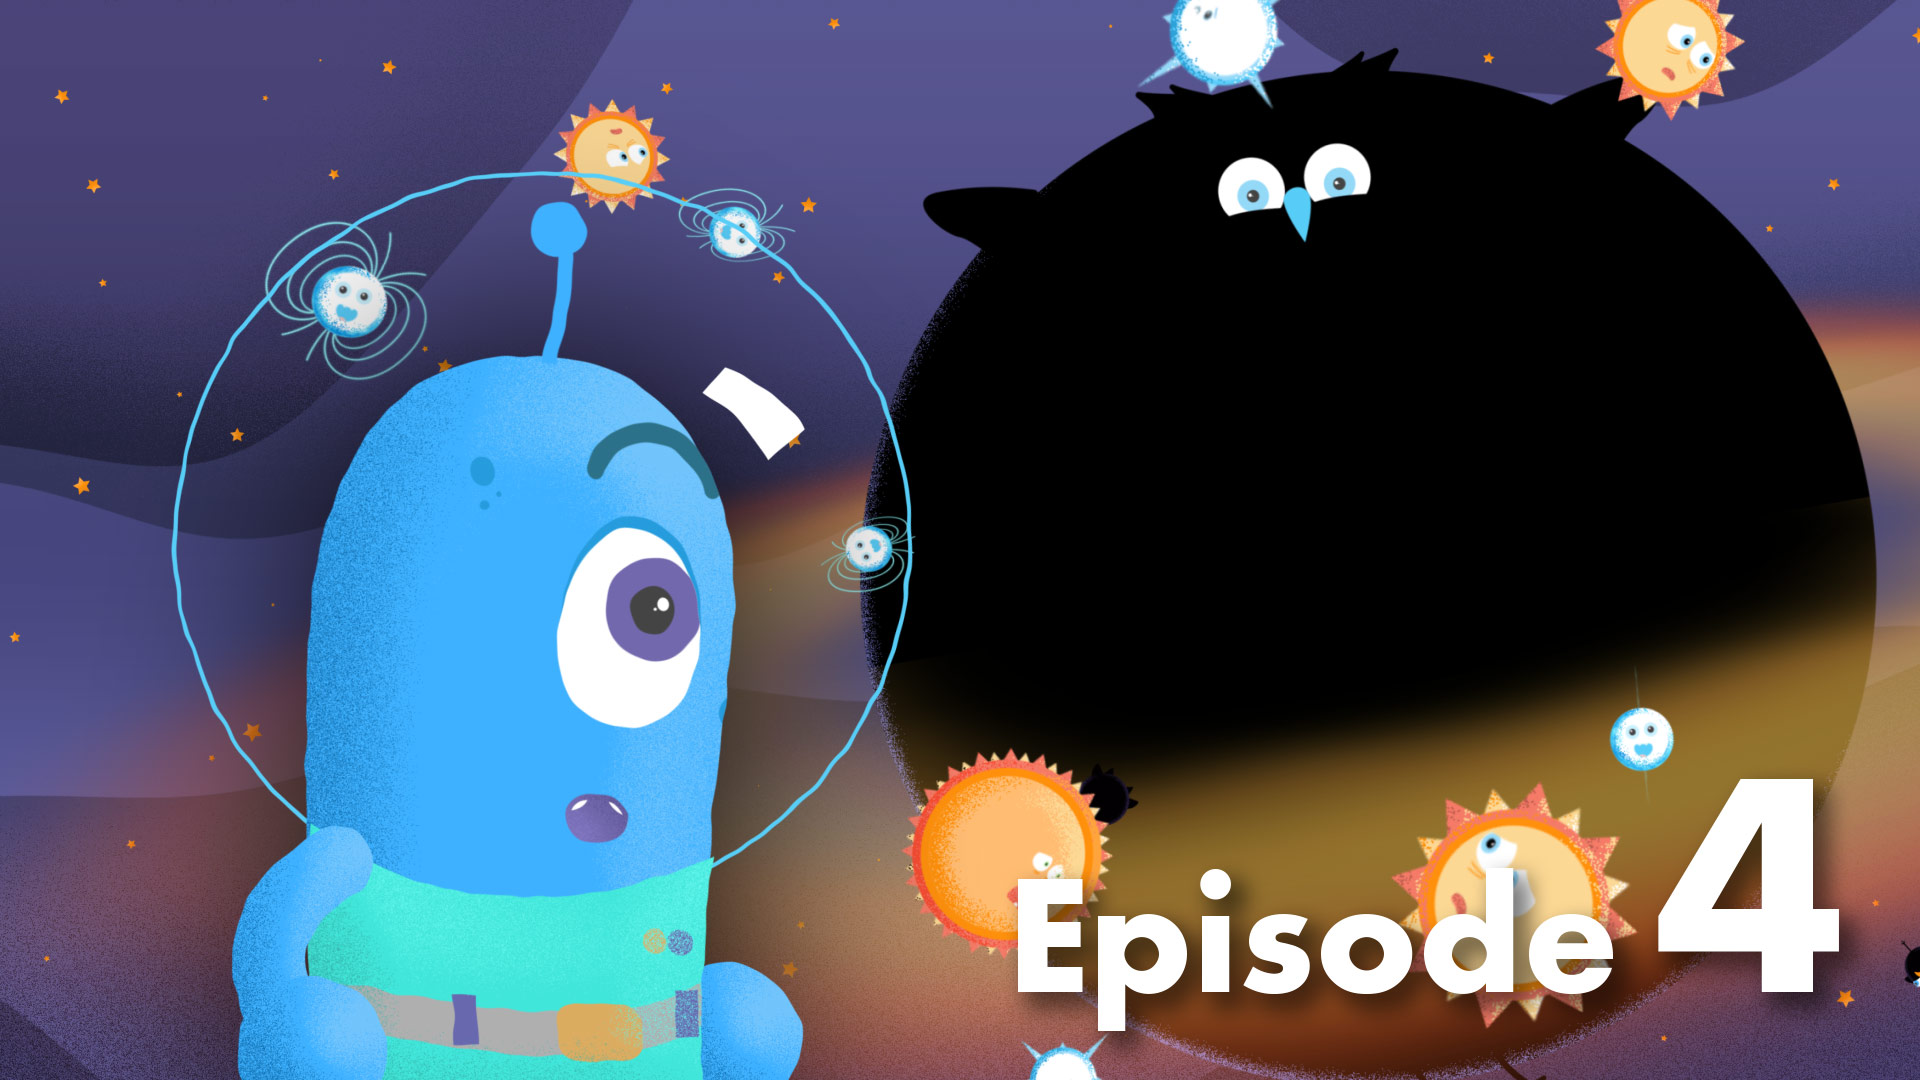 Video thumbnail with a blue cartoon figure and a big black bird representing a supermassive black hole in the background.